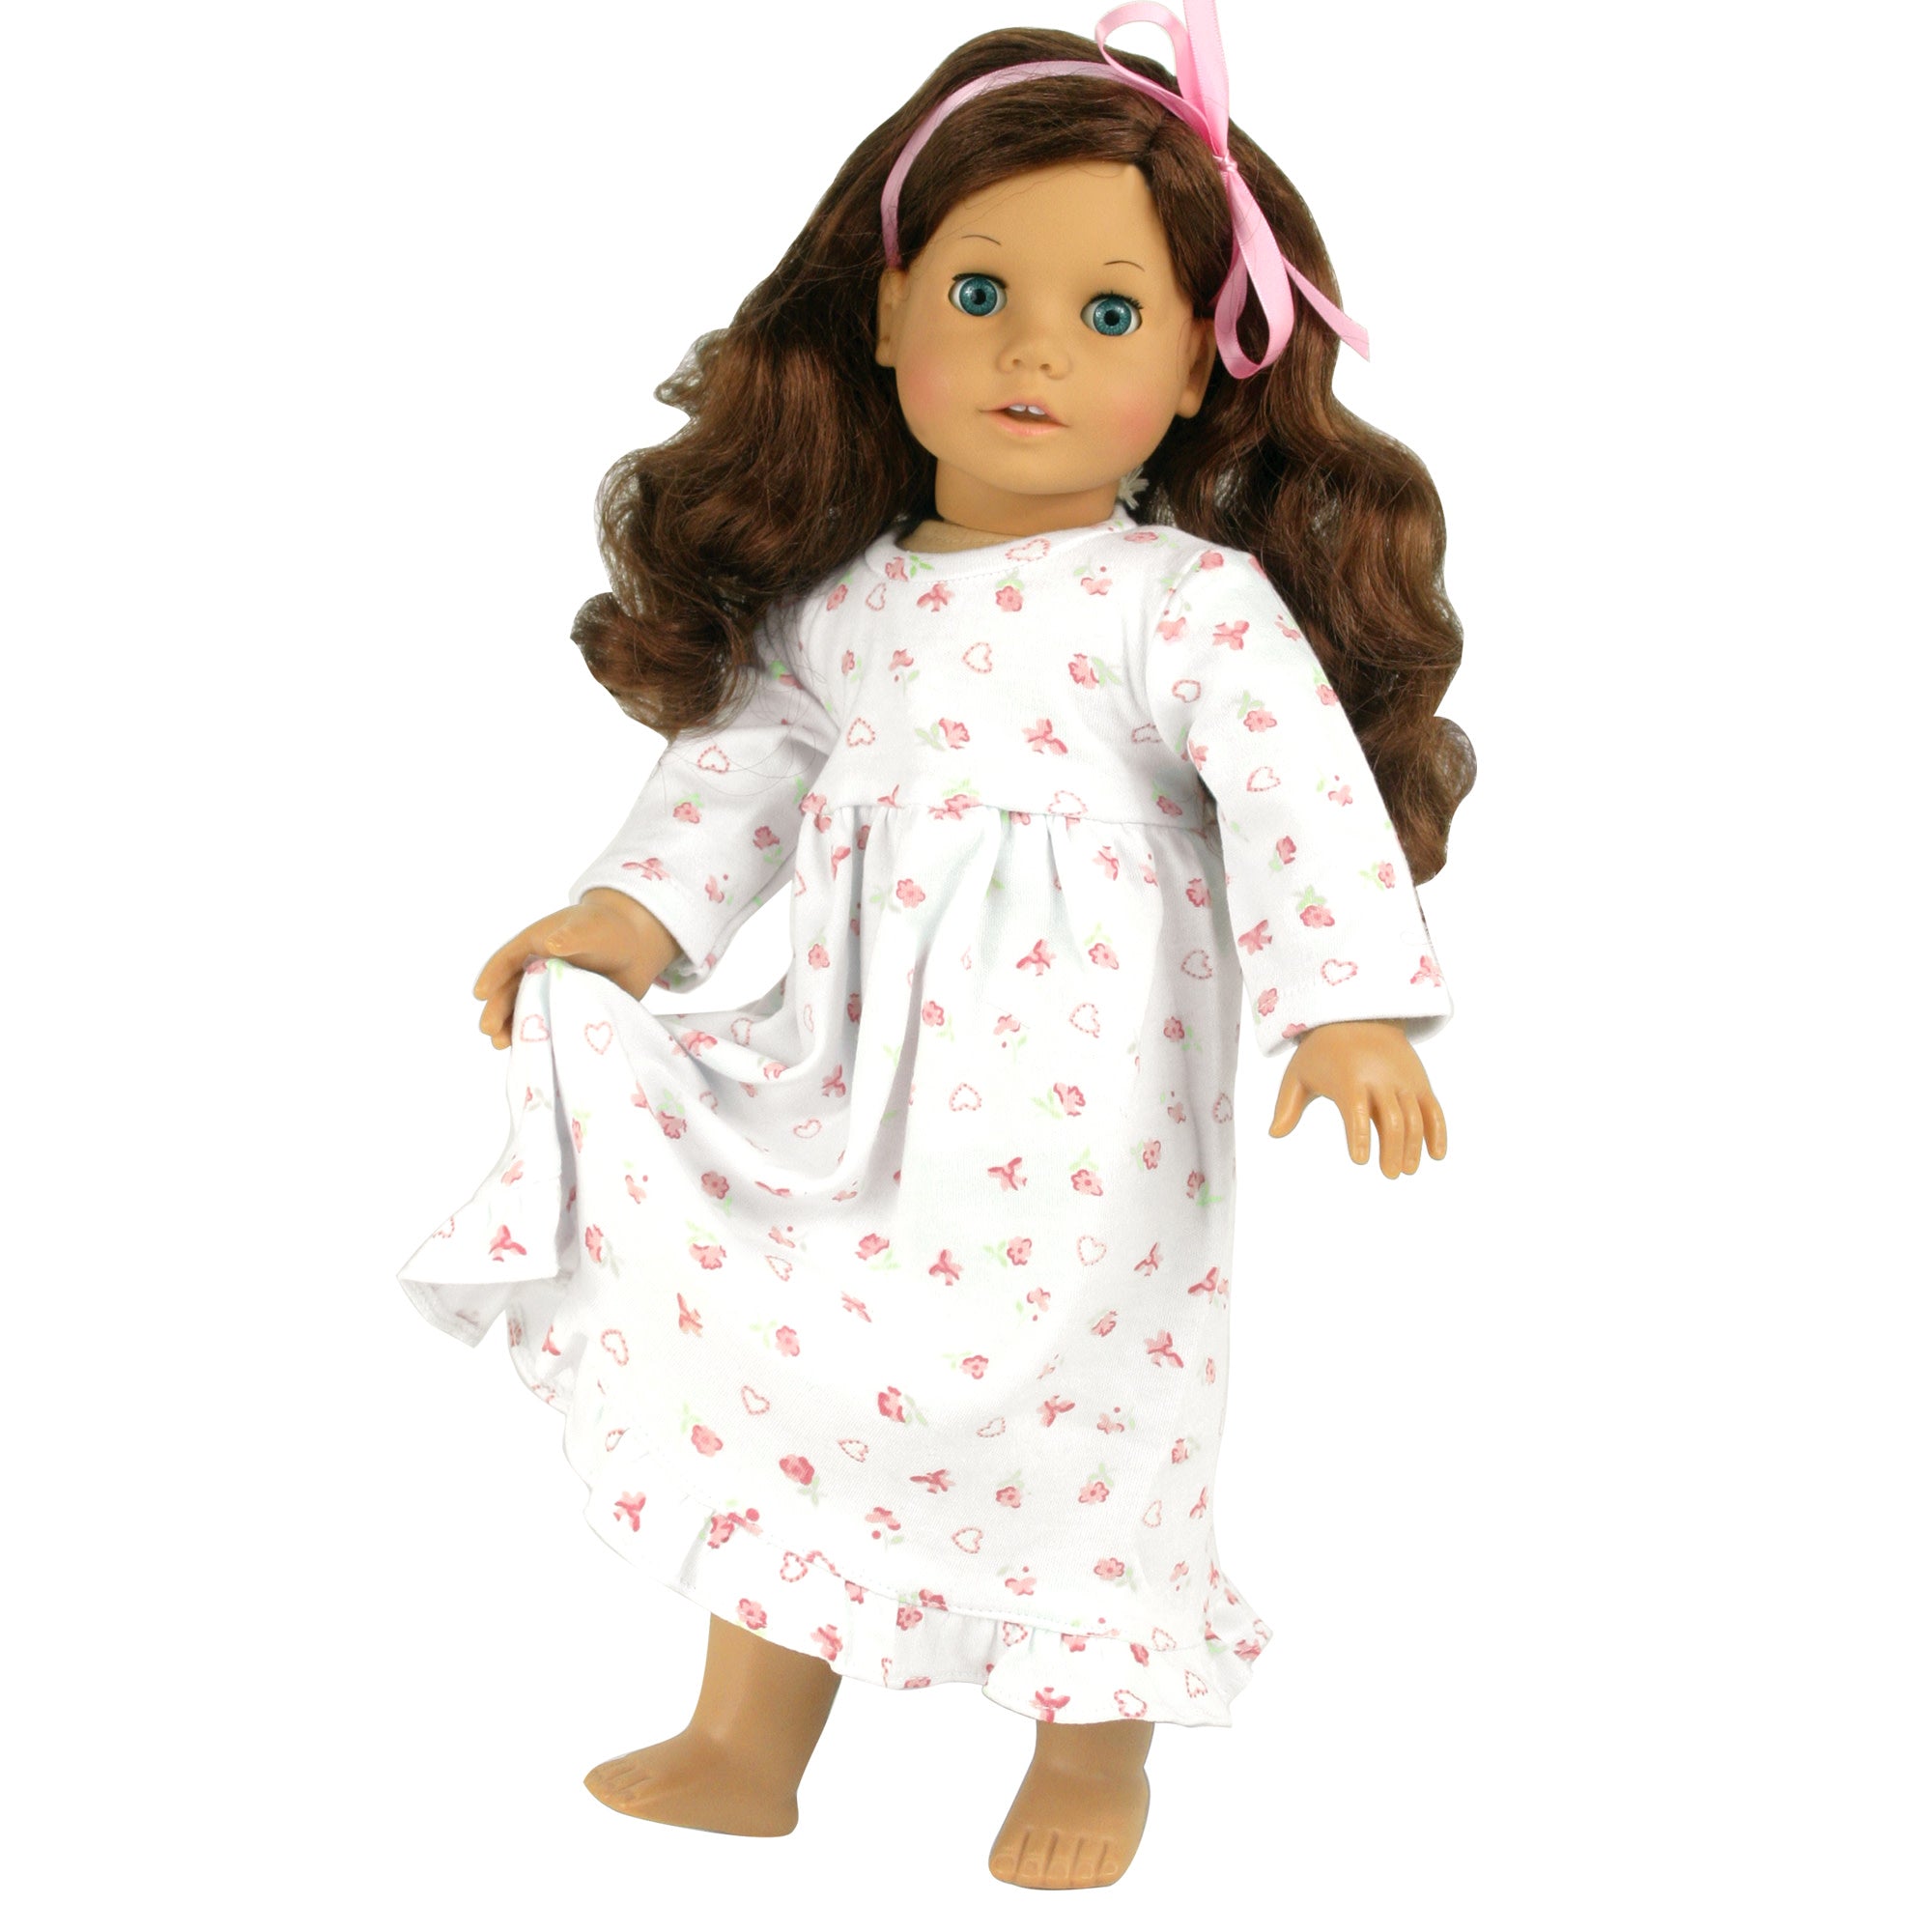 Sophia's Floral Print Nightgown for 18'' Dolls, White